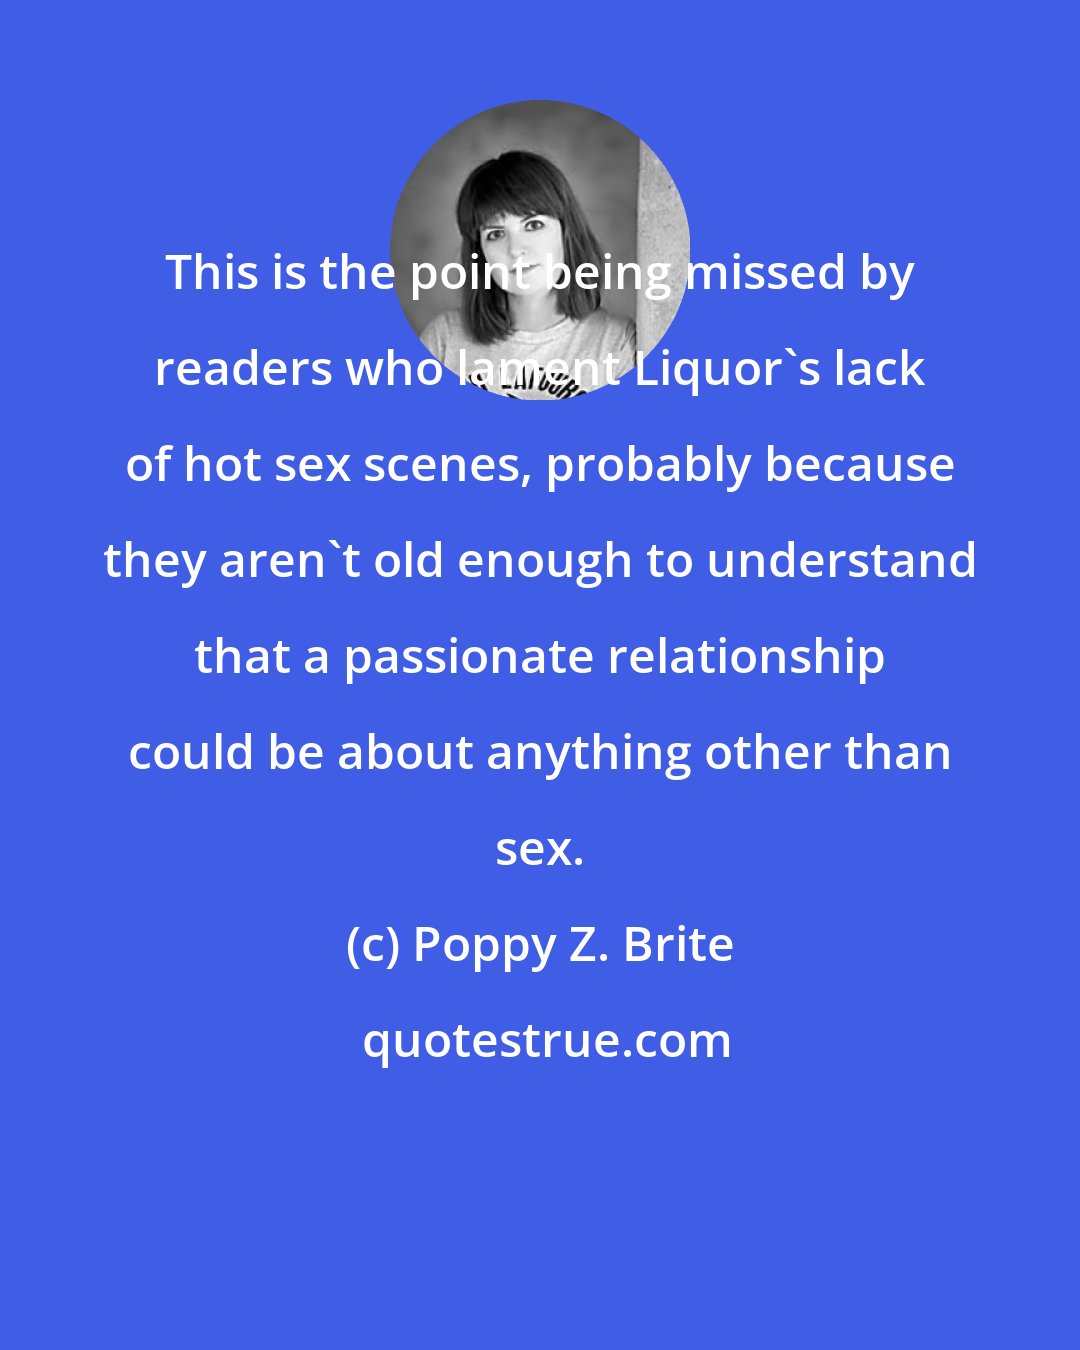 Poppy Z. Brite: This is the point being missed by readers who lament Liquor's lack of hot sex scenes, probably because they aren't old enough to understand that a passionate relationship could be about anything other than sex.